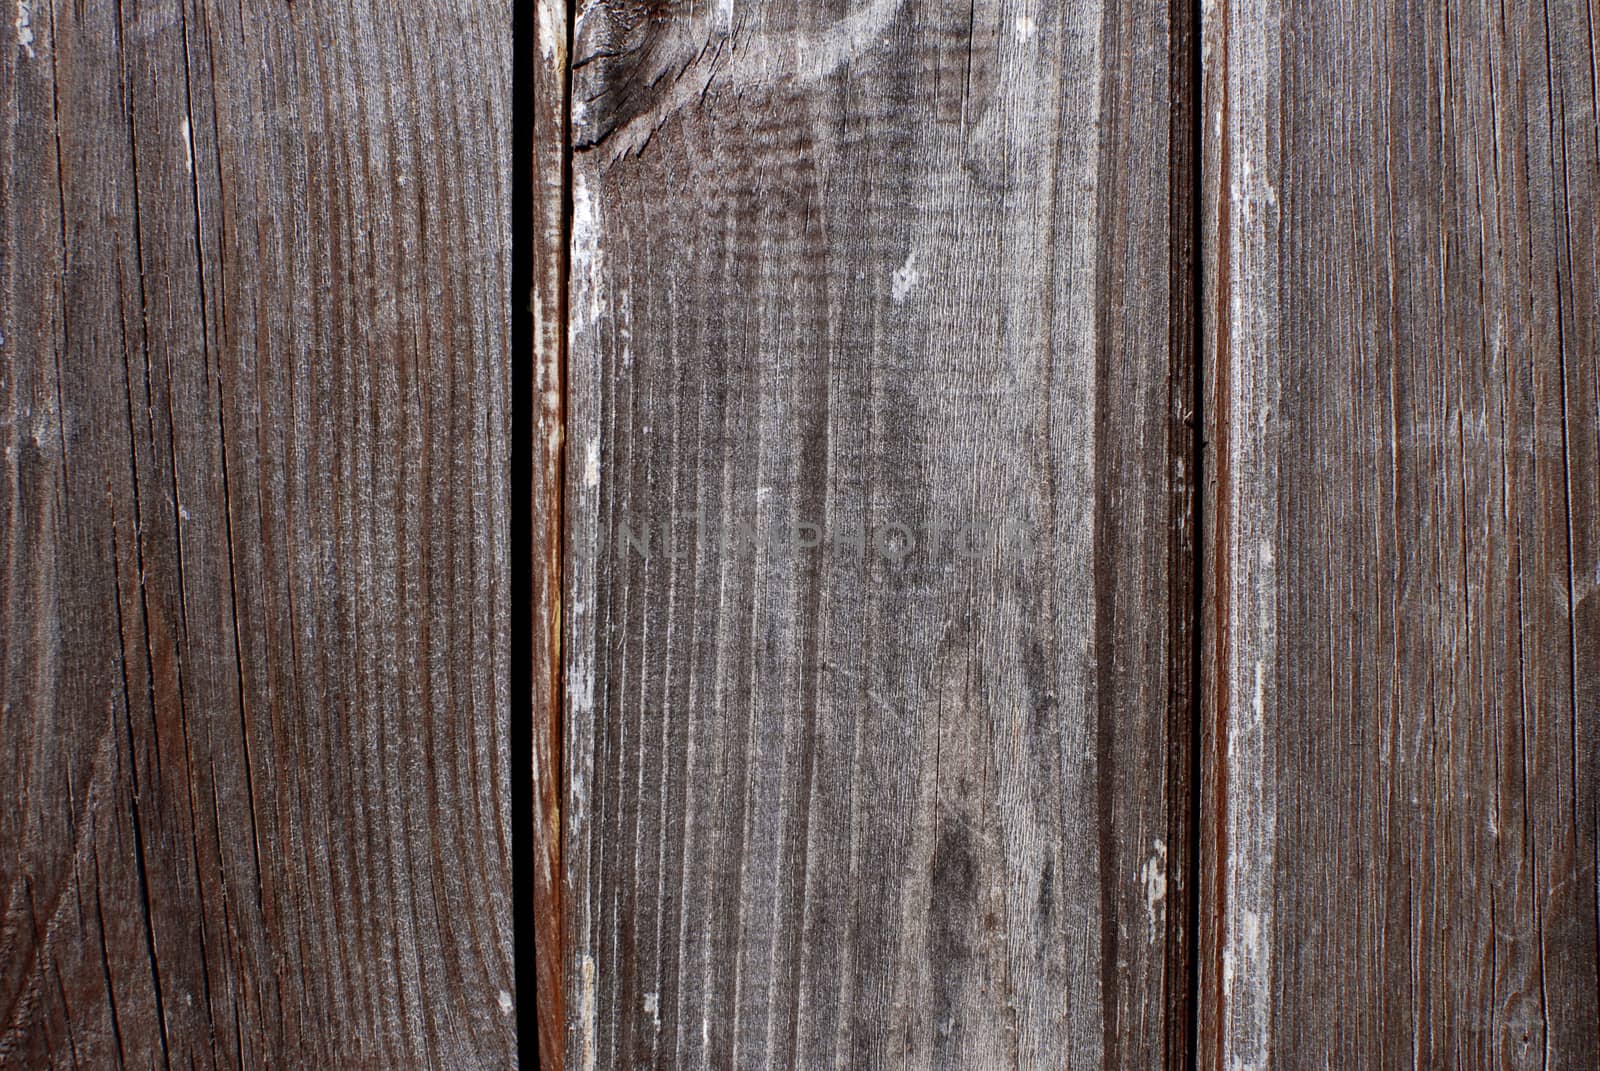 Weather-beaten wooden boards abstract background texture